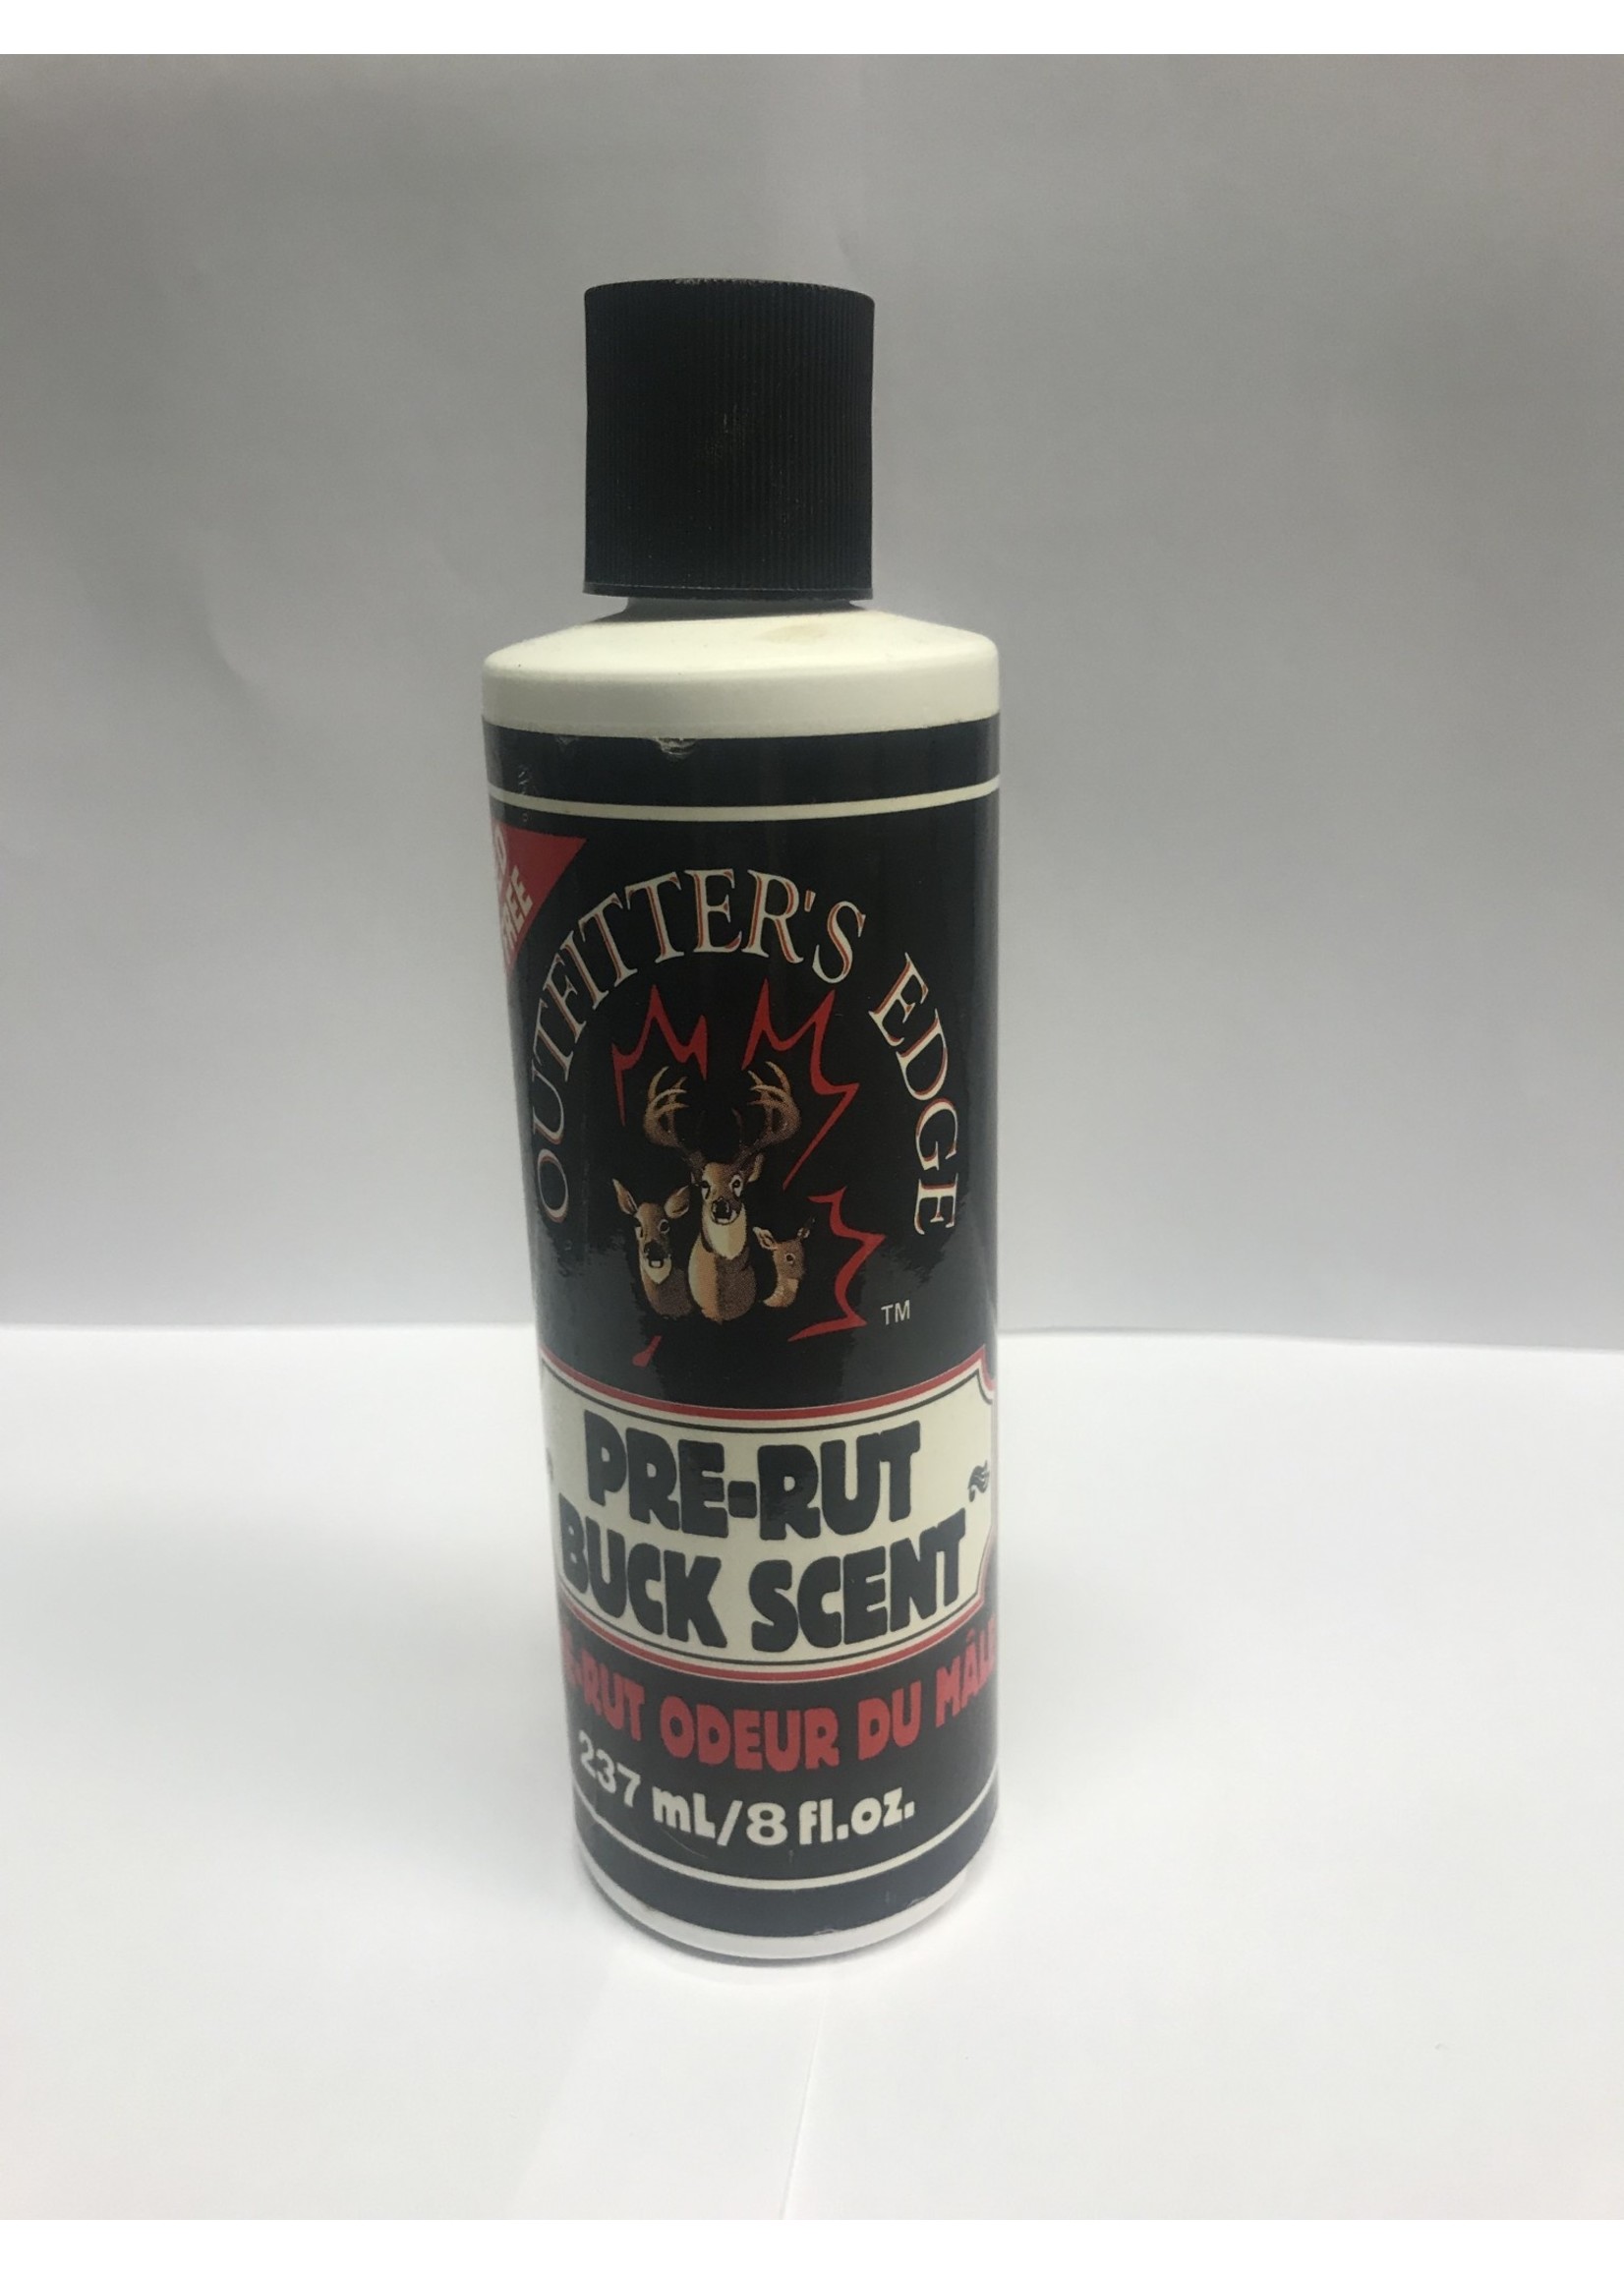 OUTFITTERS EDGE OUTFITTERS EDGE PRE-RUT BUCK SCENT 8oz